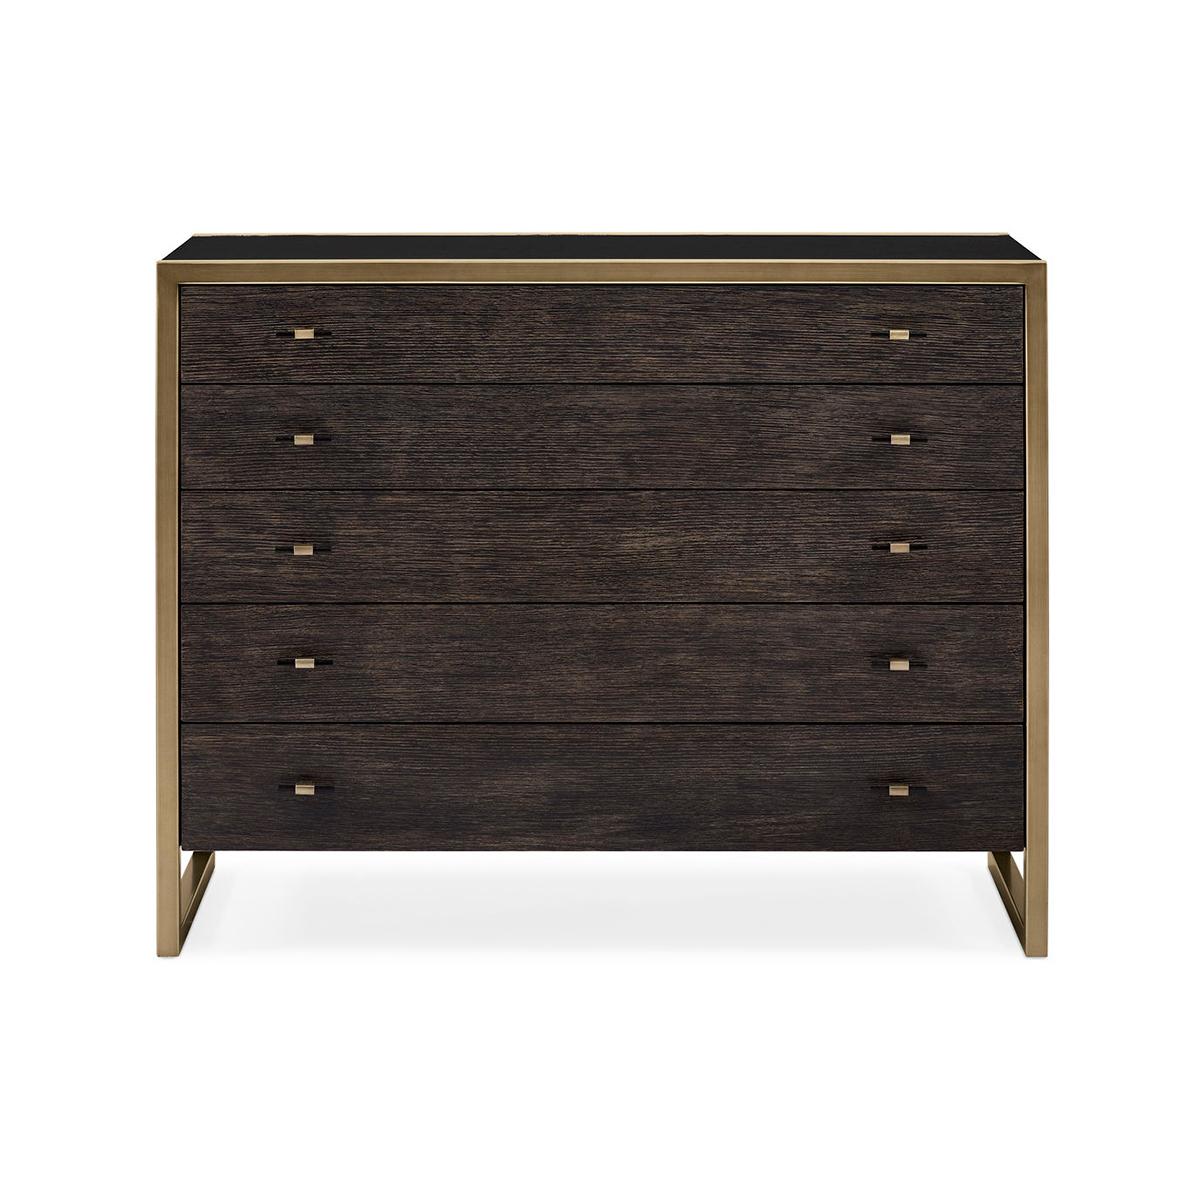 a restrained silhouette is brought to life with a modern layering of bold finishes and warm metallics. While this single chest offers several spacious drawers beautifully finished in Cerused Oak, the beauty of the piece is found in its geometric